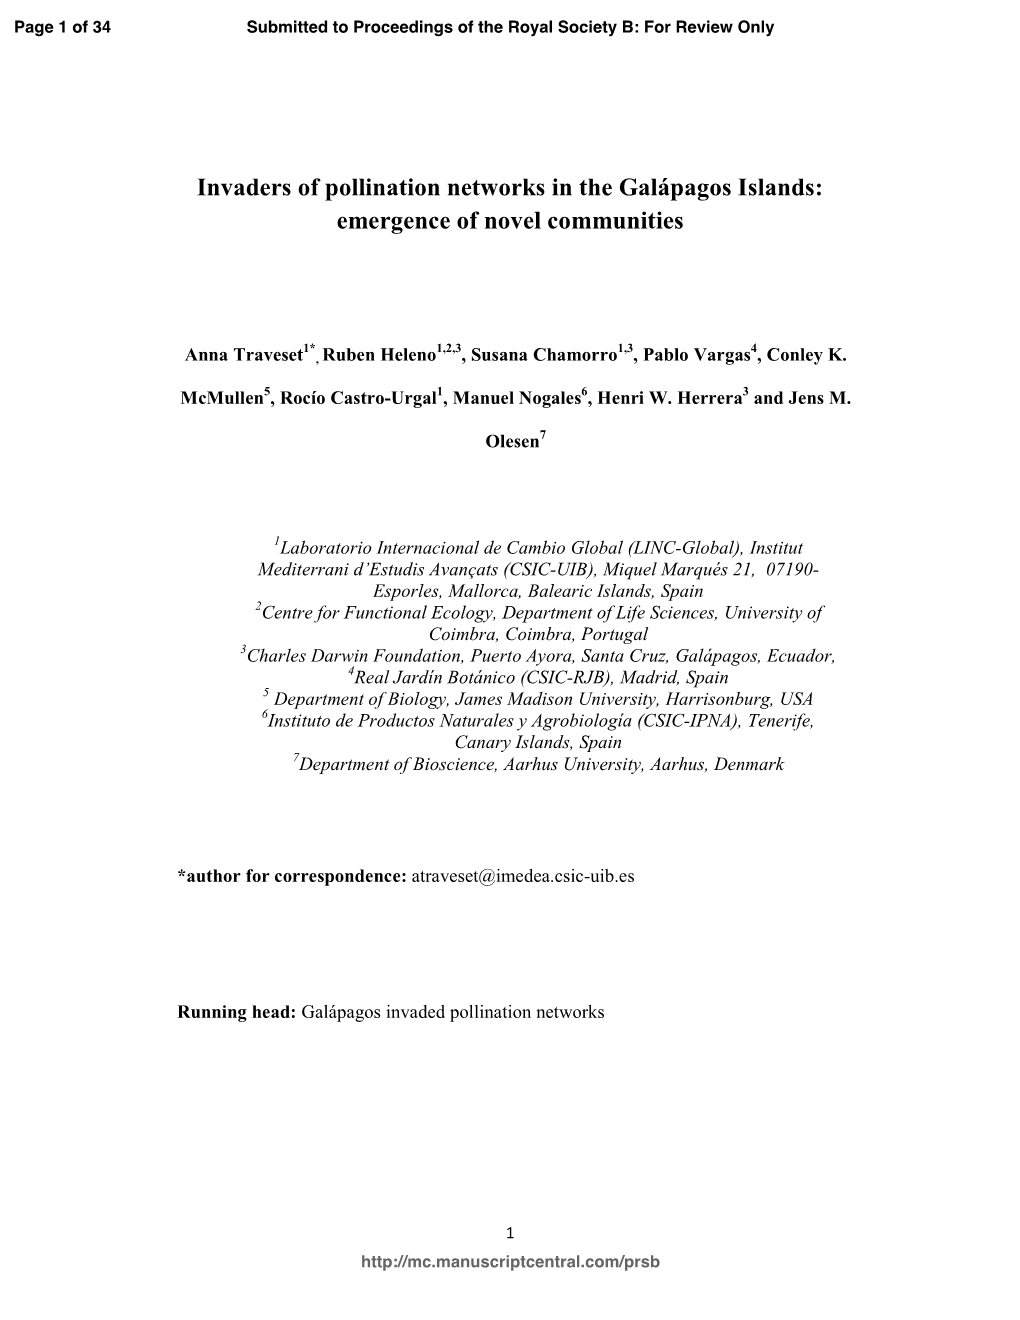 Invaders of Pollination Networks in the Galápagos Islands: Emergence of Novel Communities